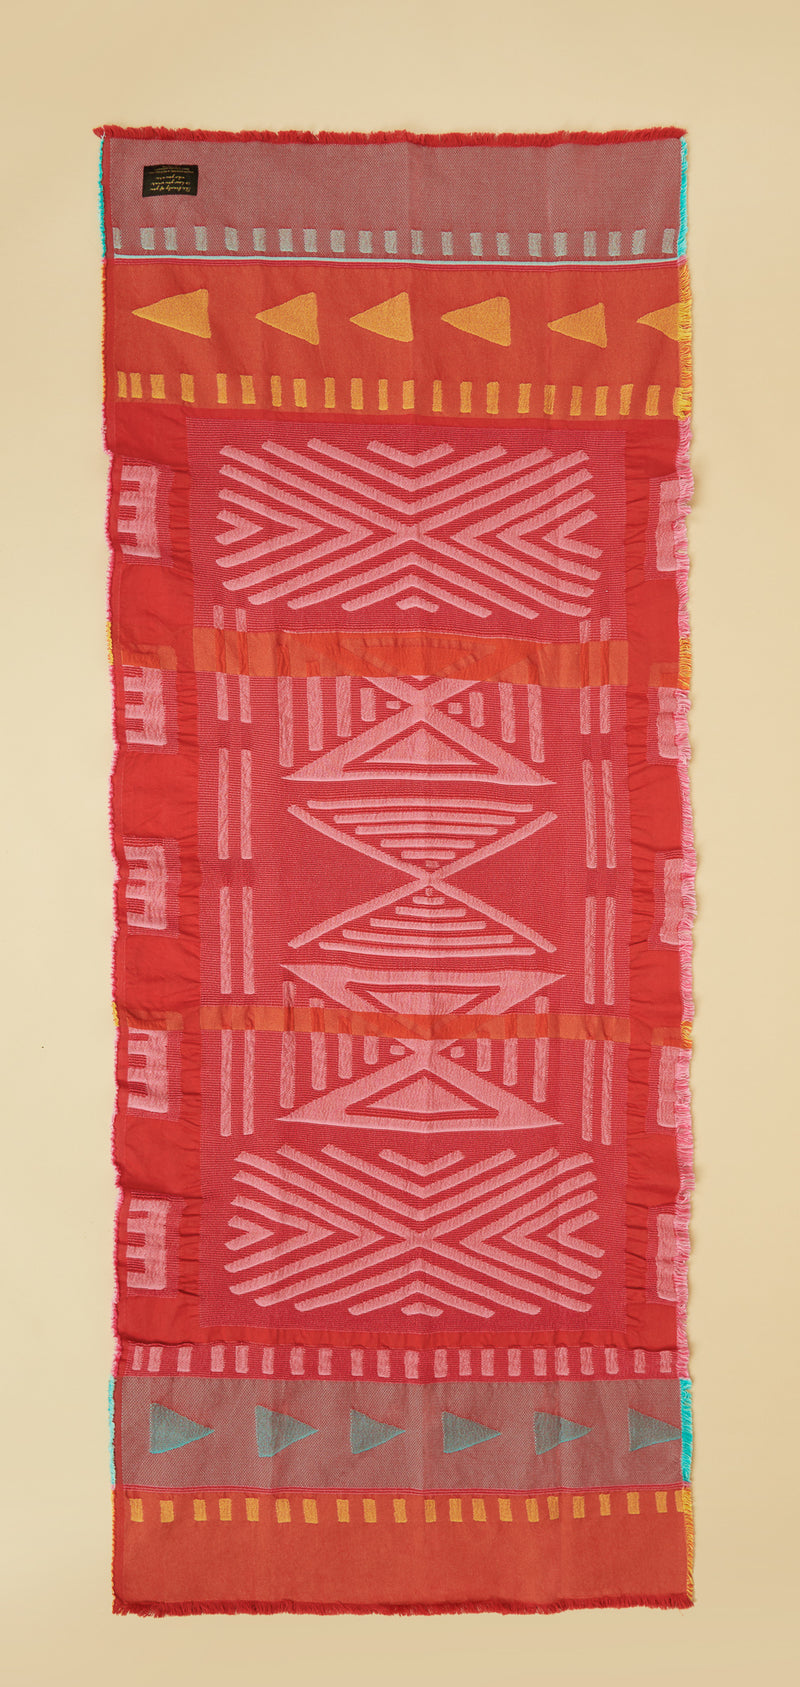 Halisi Shawl - Red/Pink (Limited Edition)